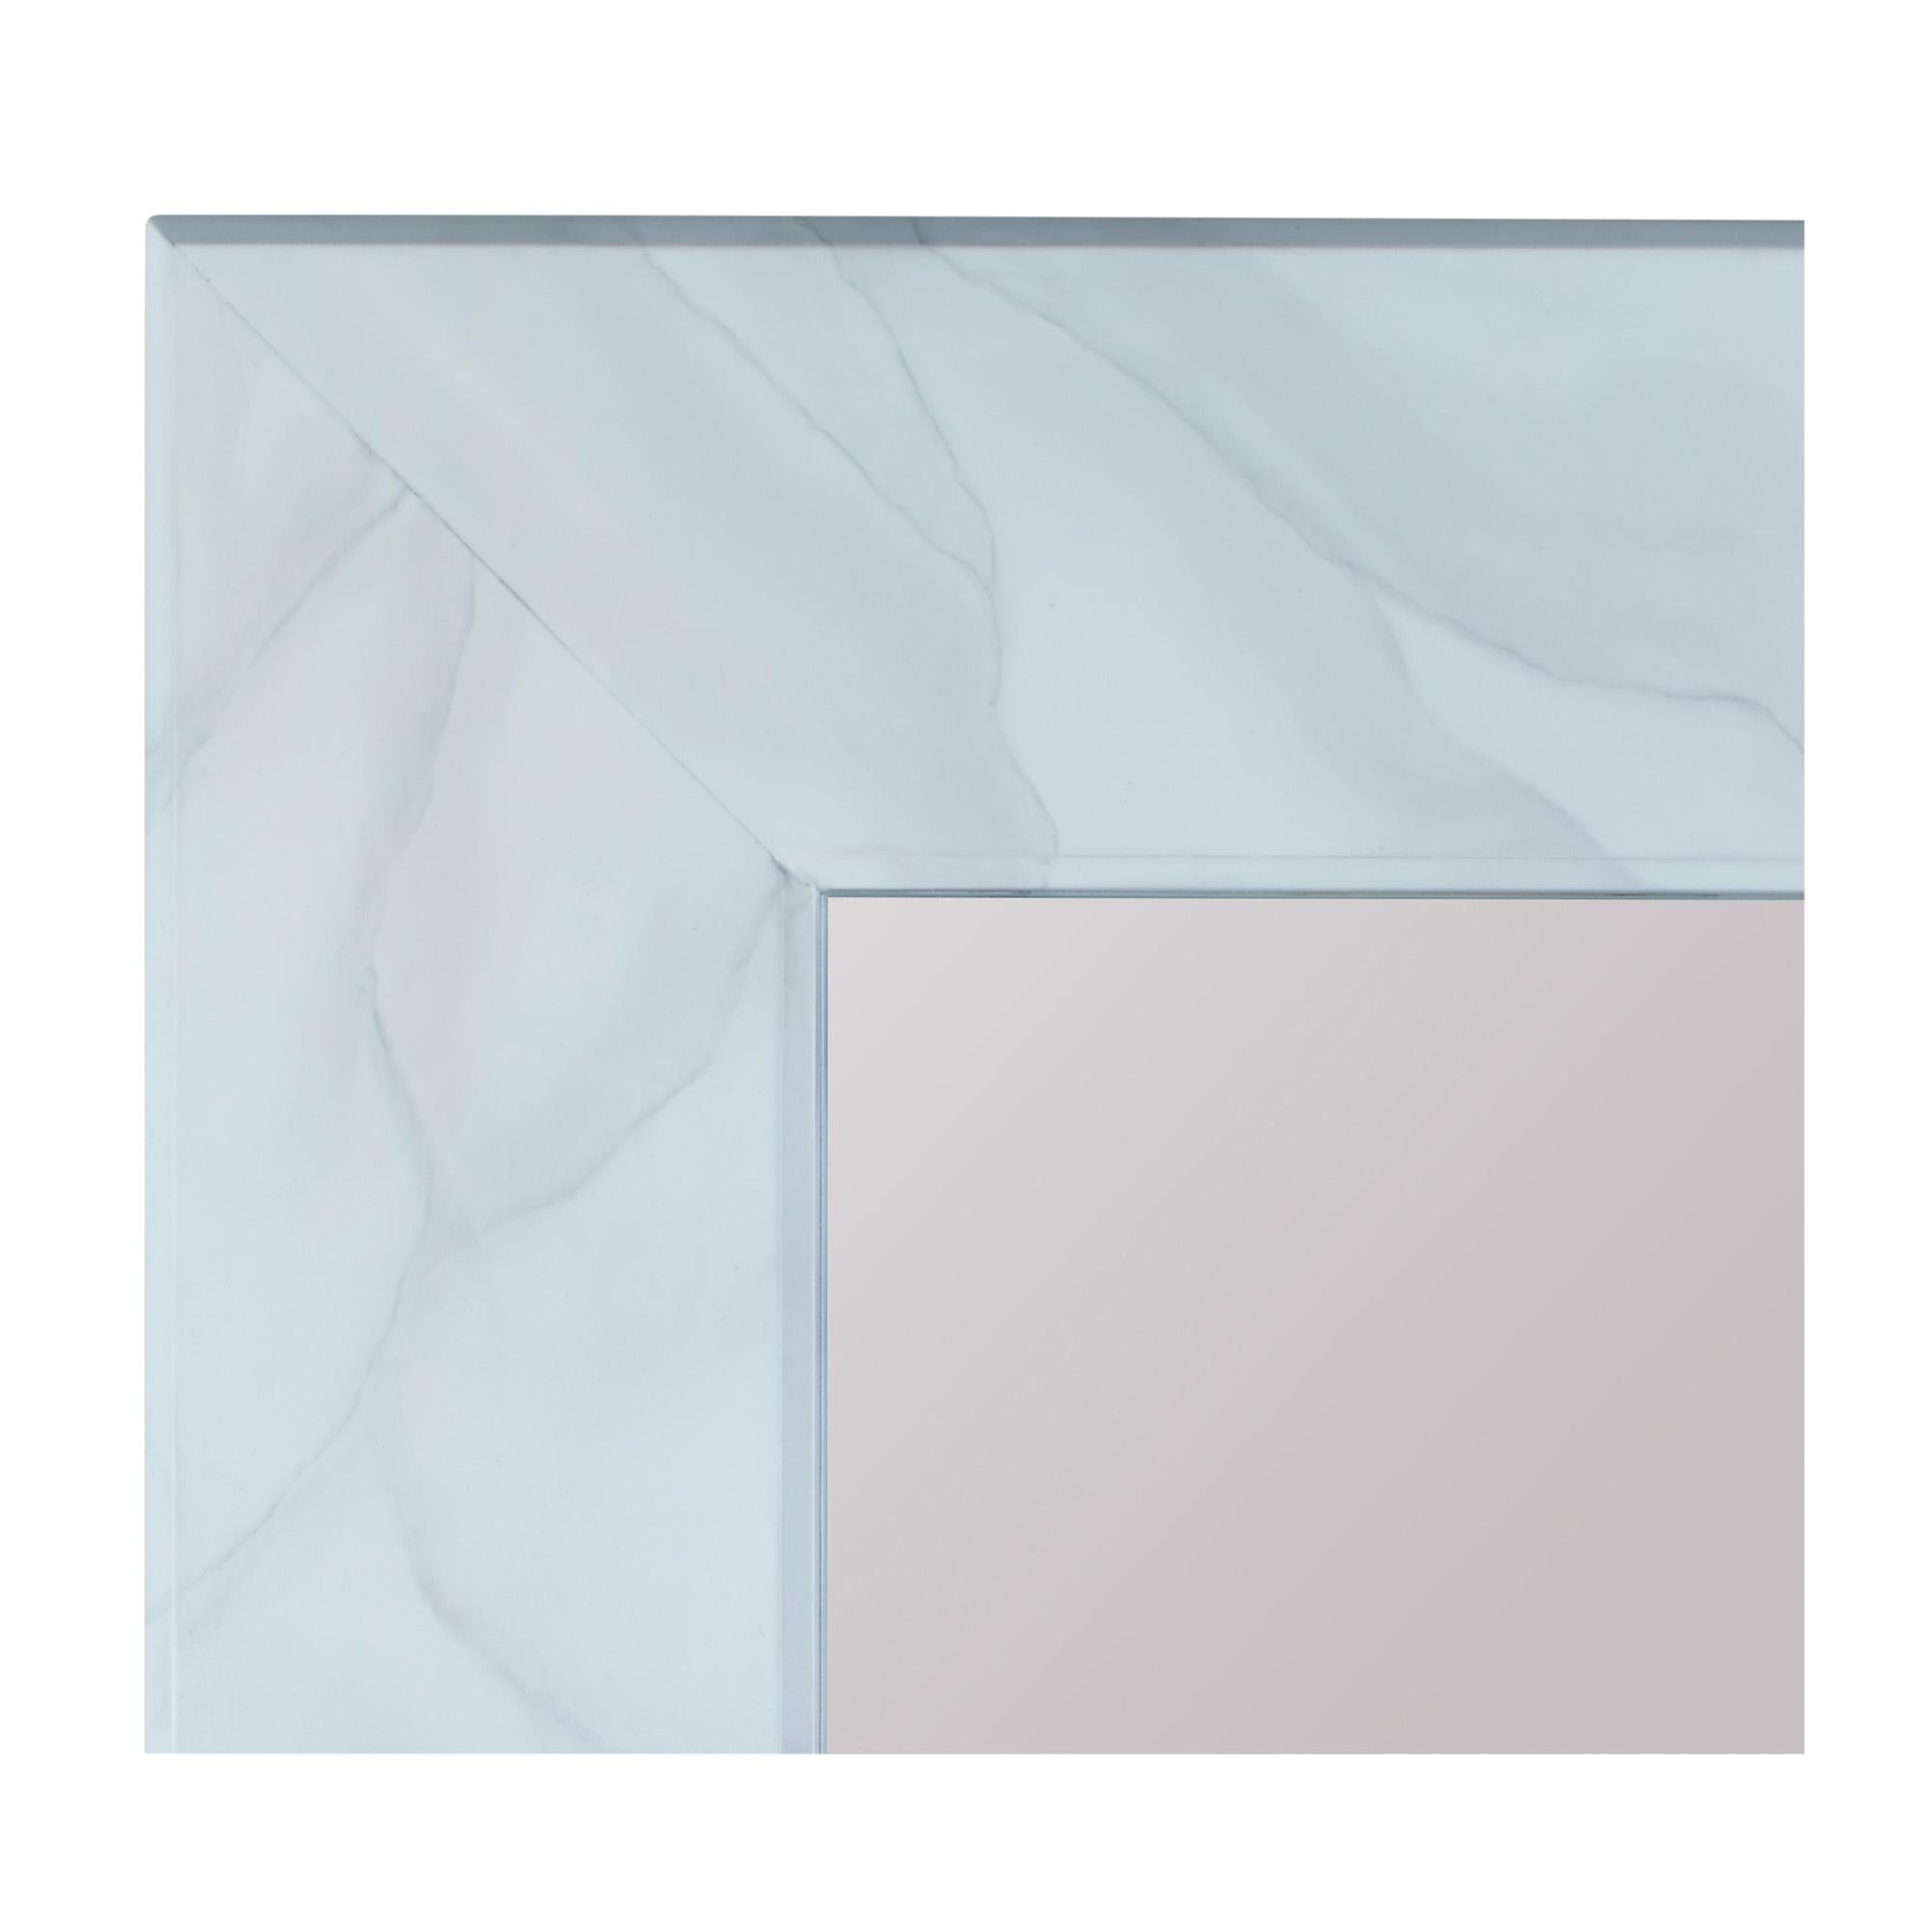 Finely hand painted faux Carrara marble stone squares mirror is a visual statement piece with Industrial permanence. Made in the USA.
   